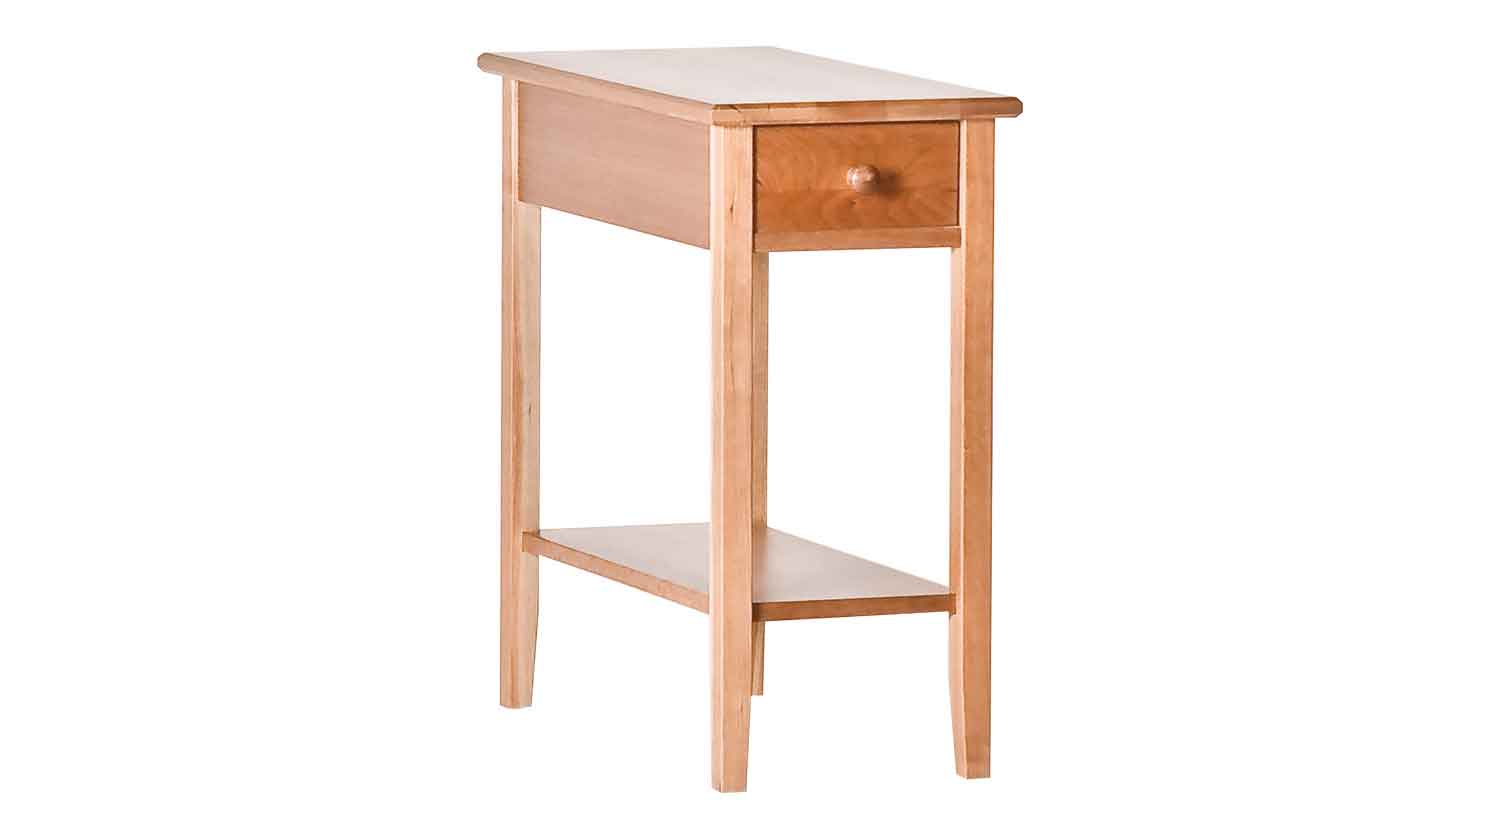 Small Side Table for Small Spaces - Narrow Small End Tables Living